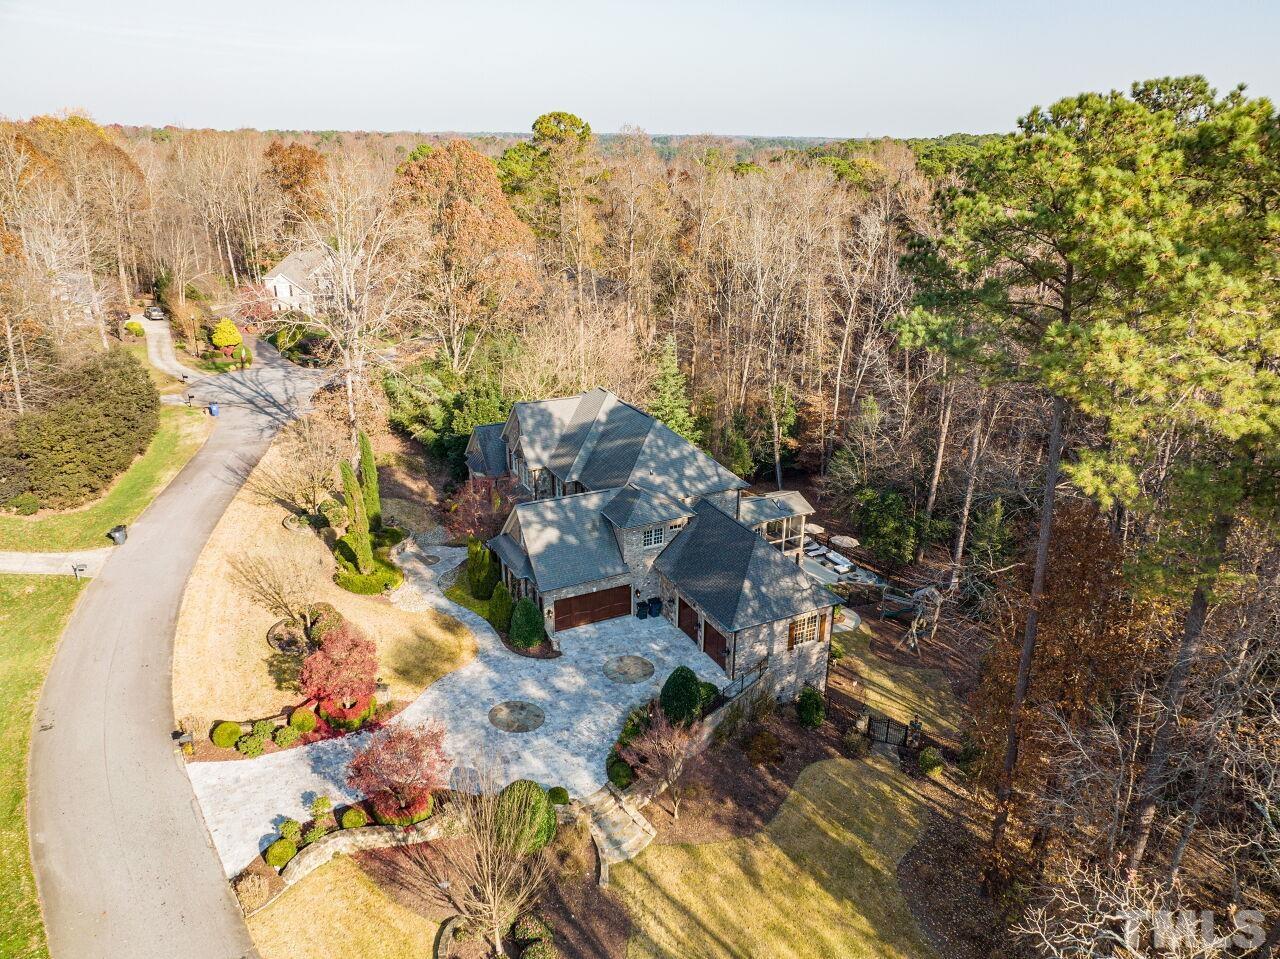 Welcome home to 5309 Millstone Creek Drive.  This executive home has high-end finishes and furnishings throughout.  It will be the perfect place to call home.